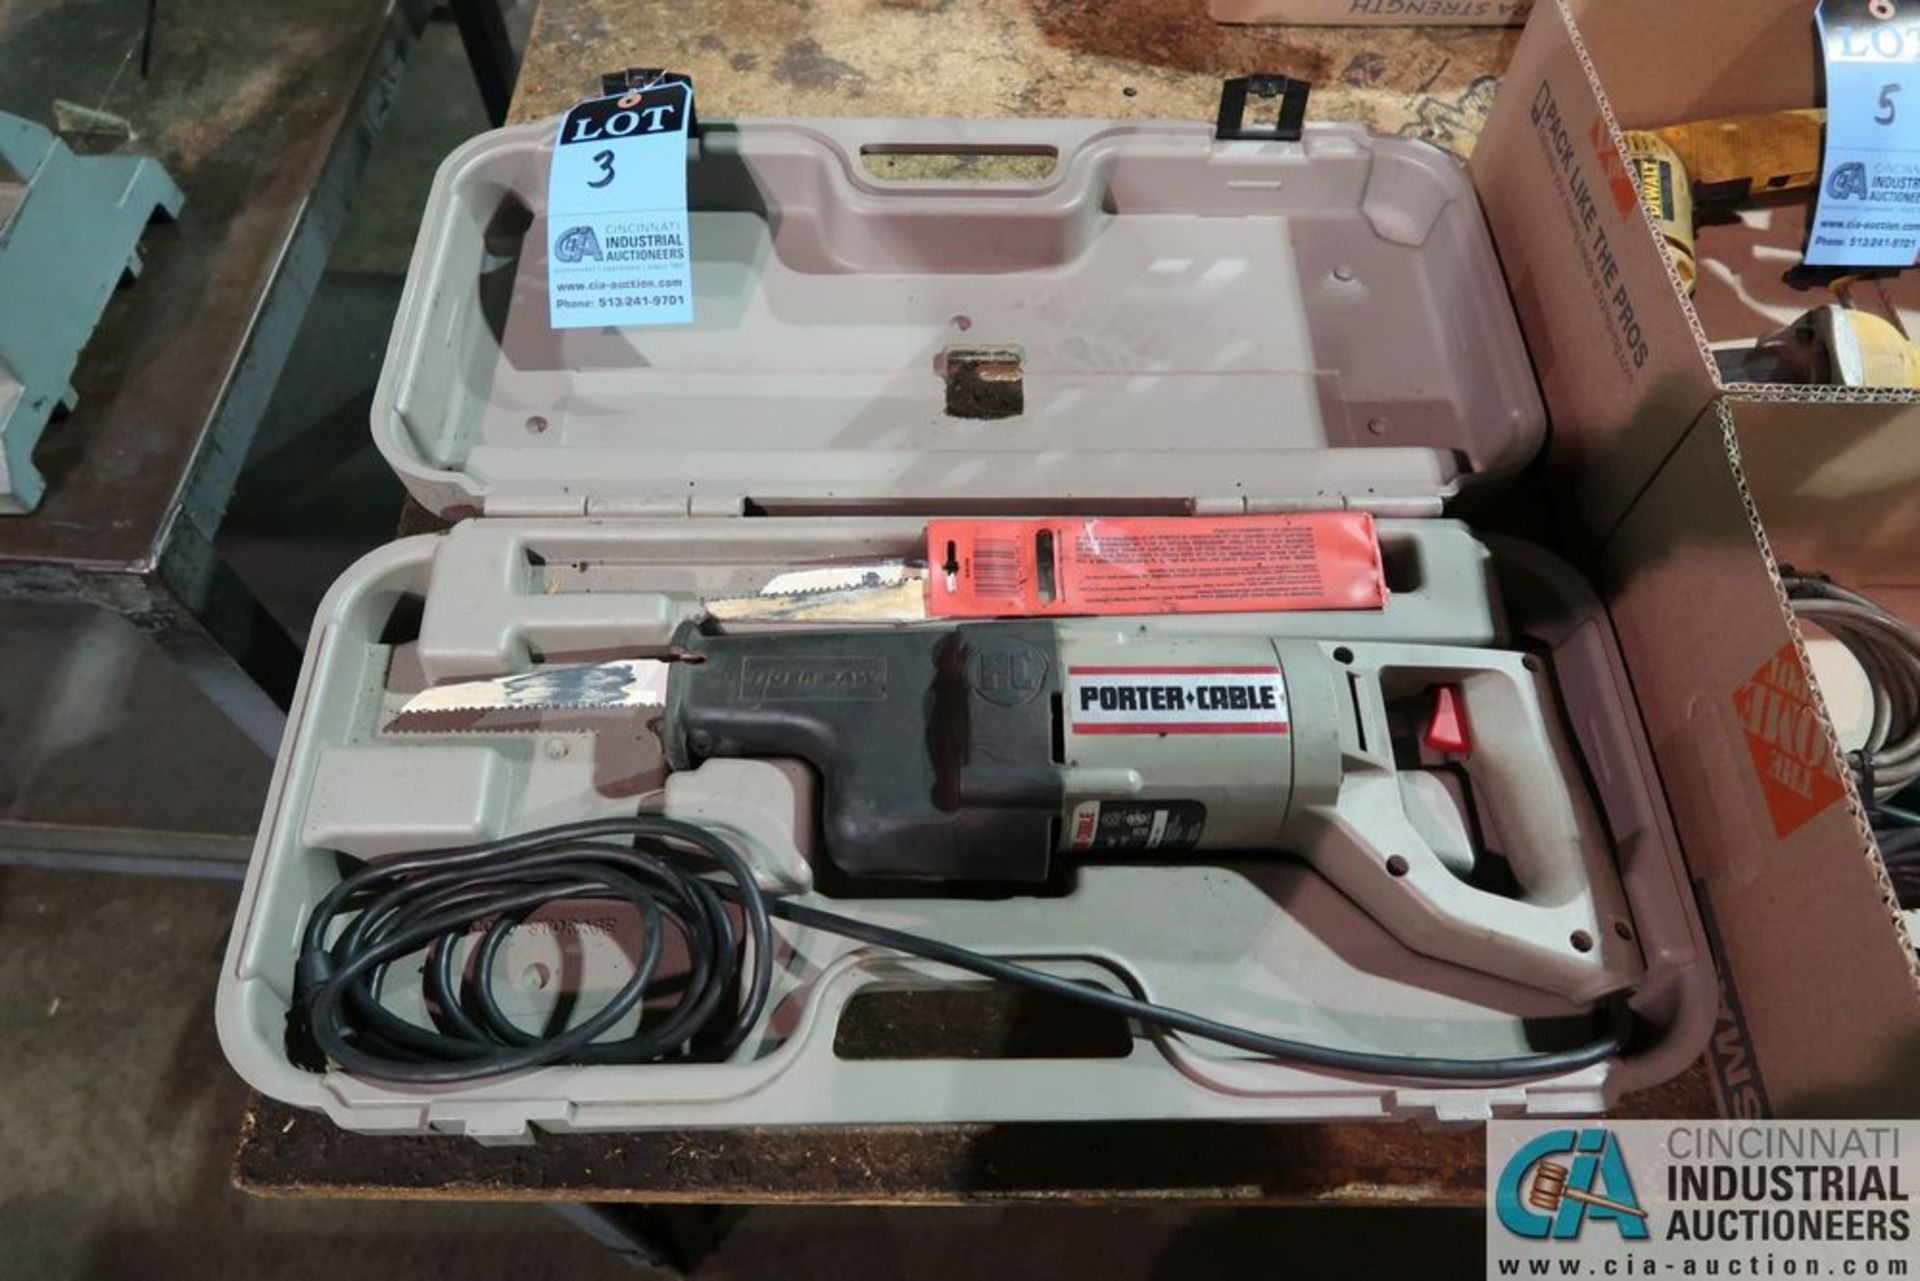 PORTER-CABLE MODEL 738 ELECTRIC VS TIGER SAW